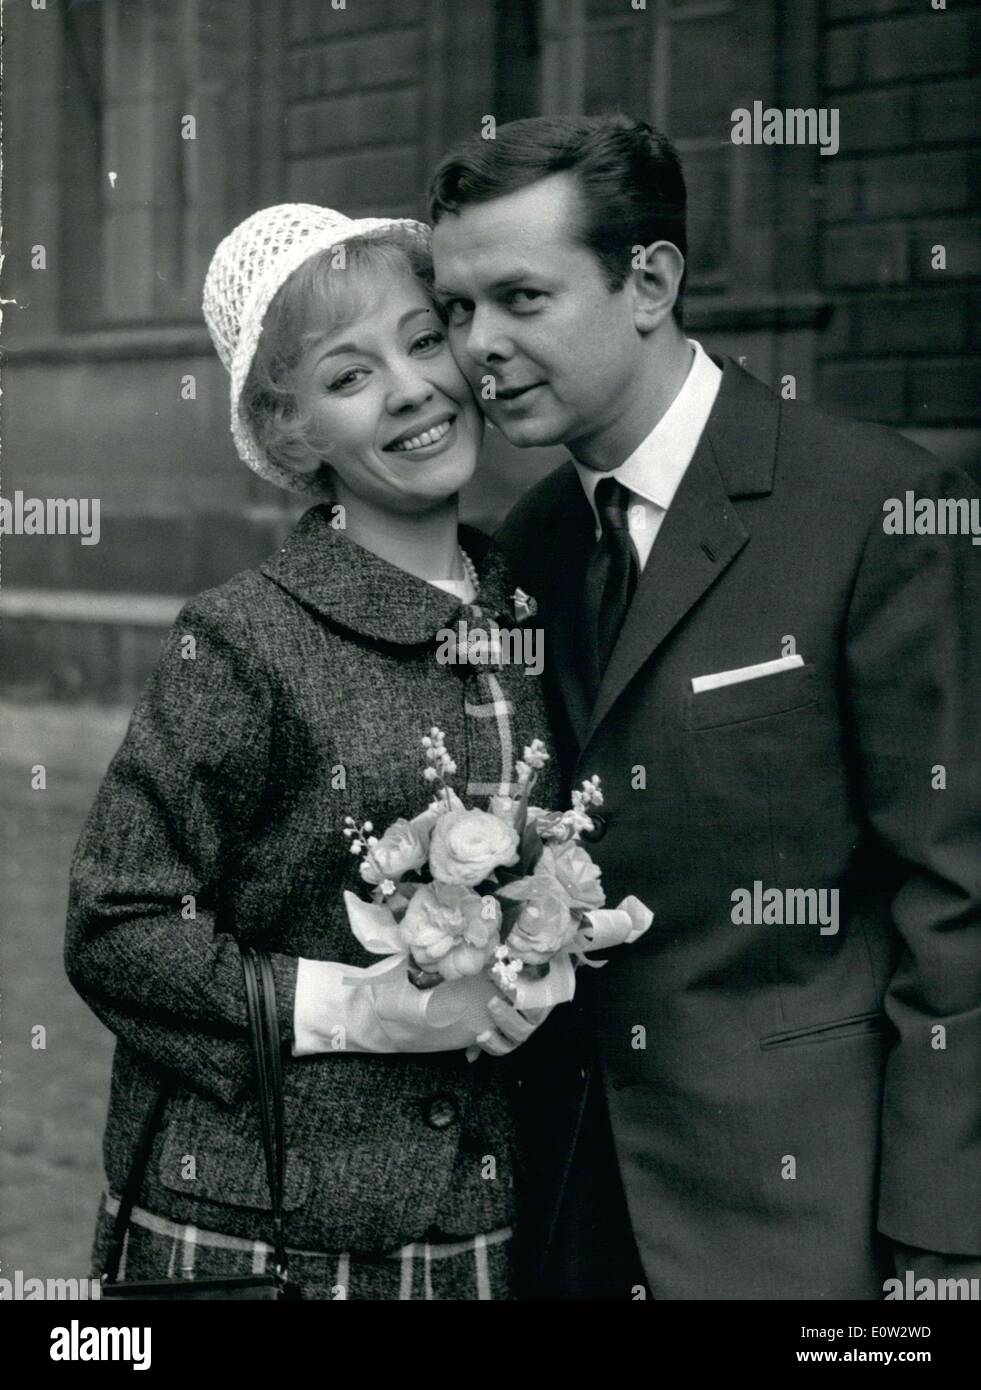 Feb. 21, 1961 - 27-year-old Dominique Page took her day off to get married.The Oscar-winning actress married Pierre Capozzi (36), an assistant of one of the directors at the French supreme court, at a courthouse. Stock Photo